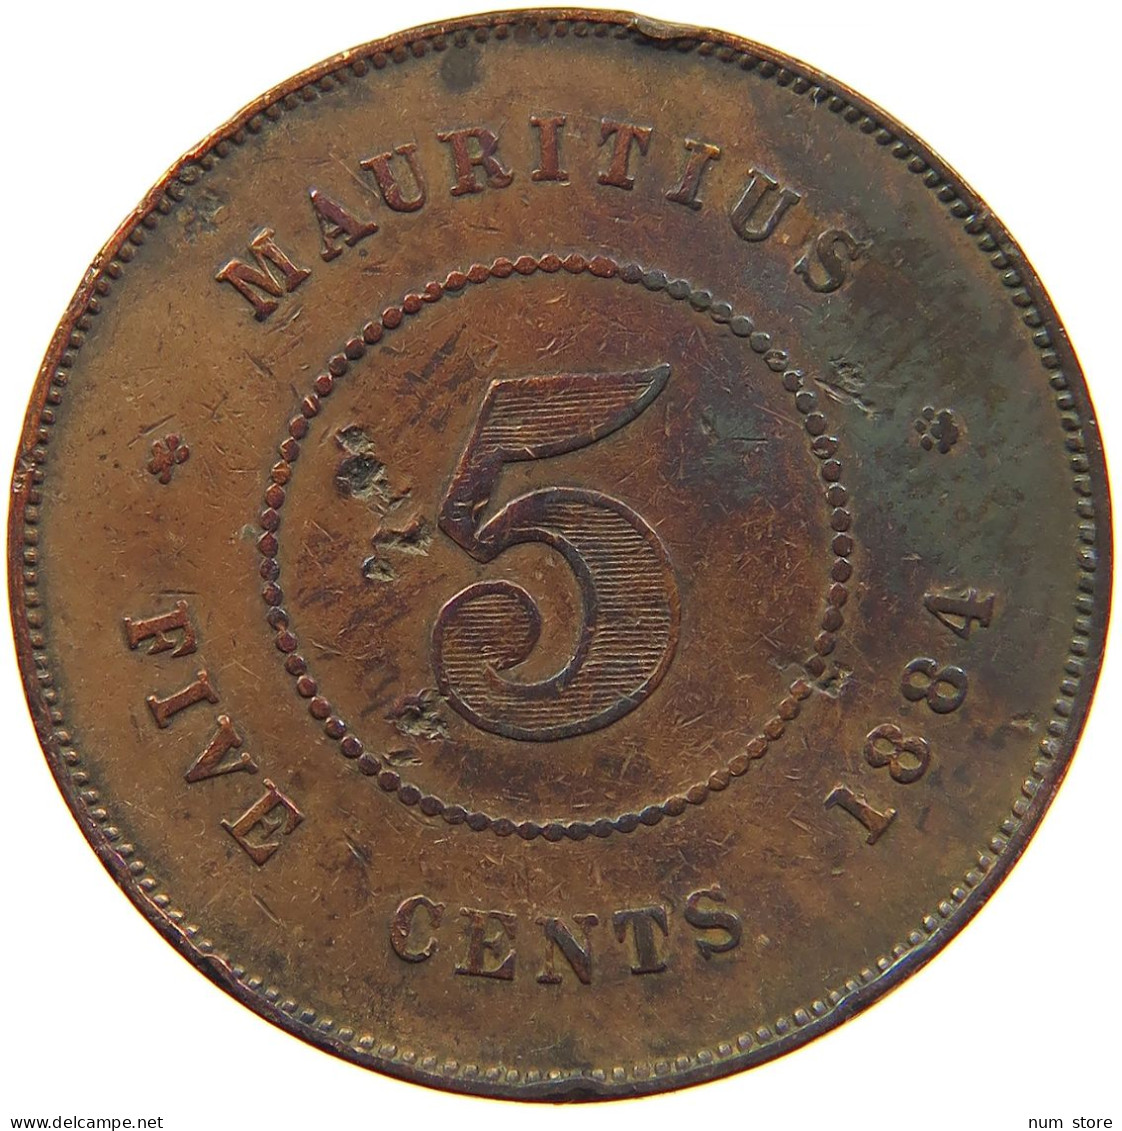 MAURITIUS 5 CENTS 1884 #s085 0177 - Maurice